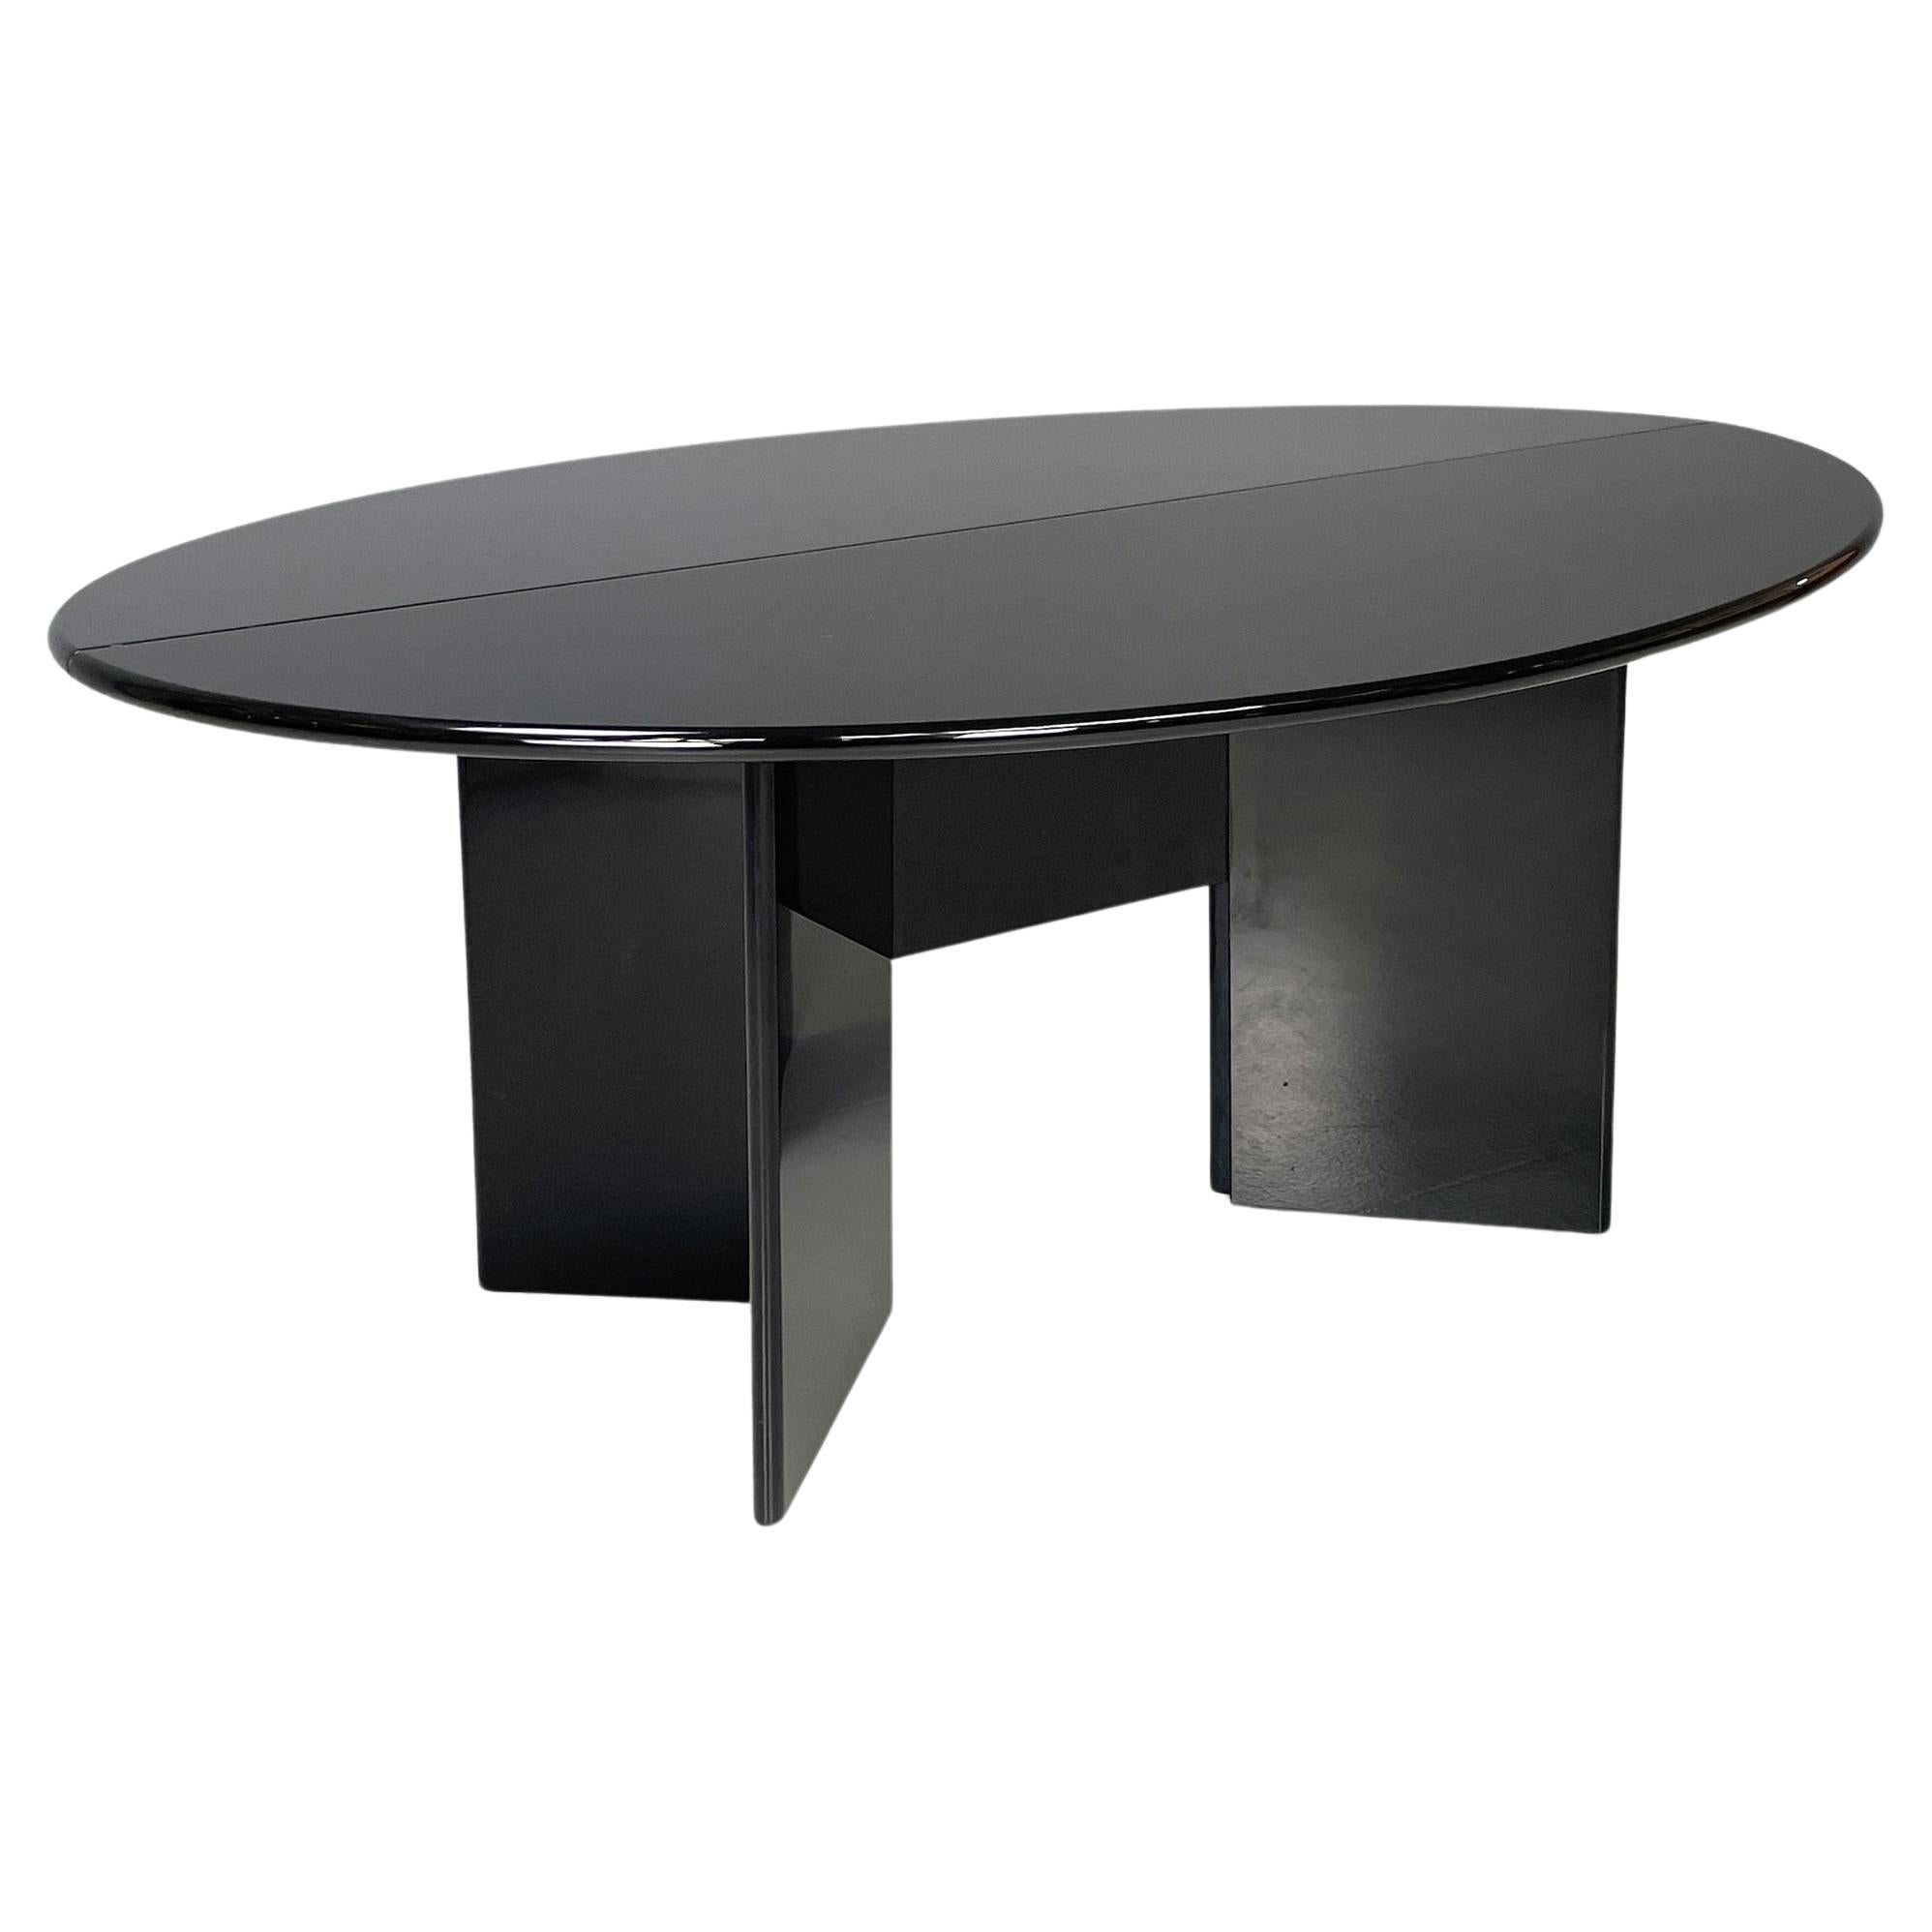 Italian modern Black Dining table or console by Takahama for Cassina, 1970s For Sale